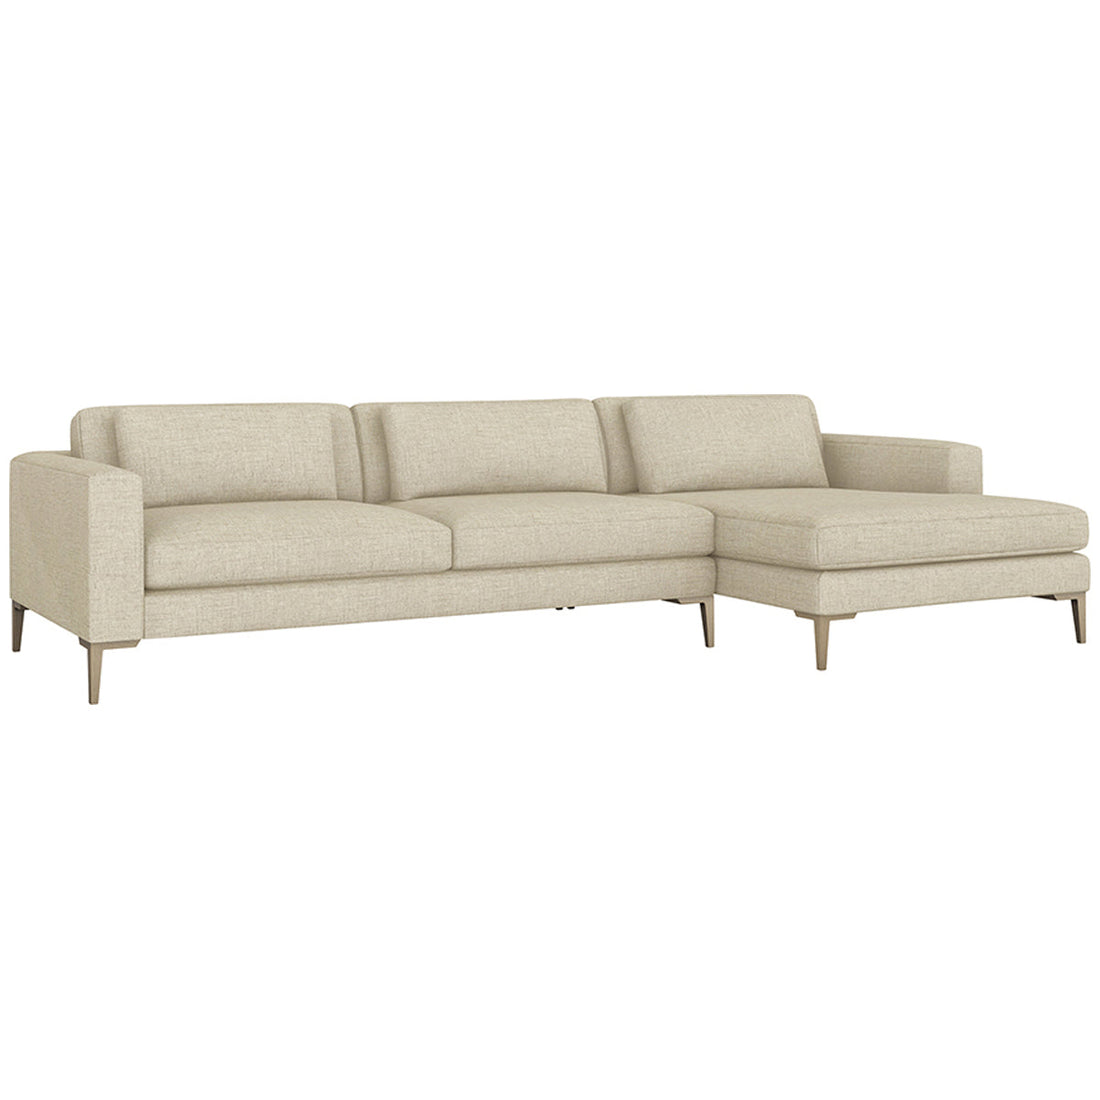 Interlude Home Izzy 2-Piece Sectional - Bluff